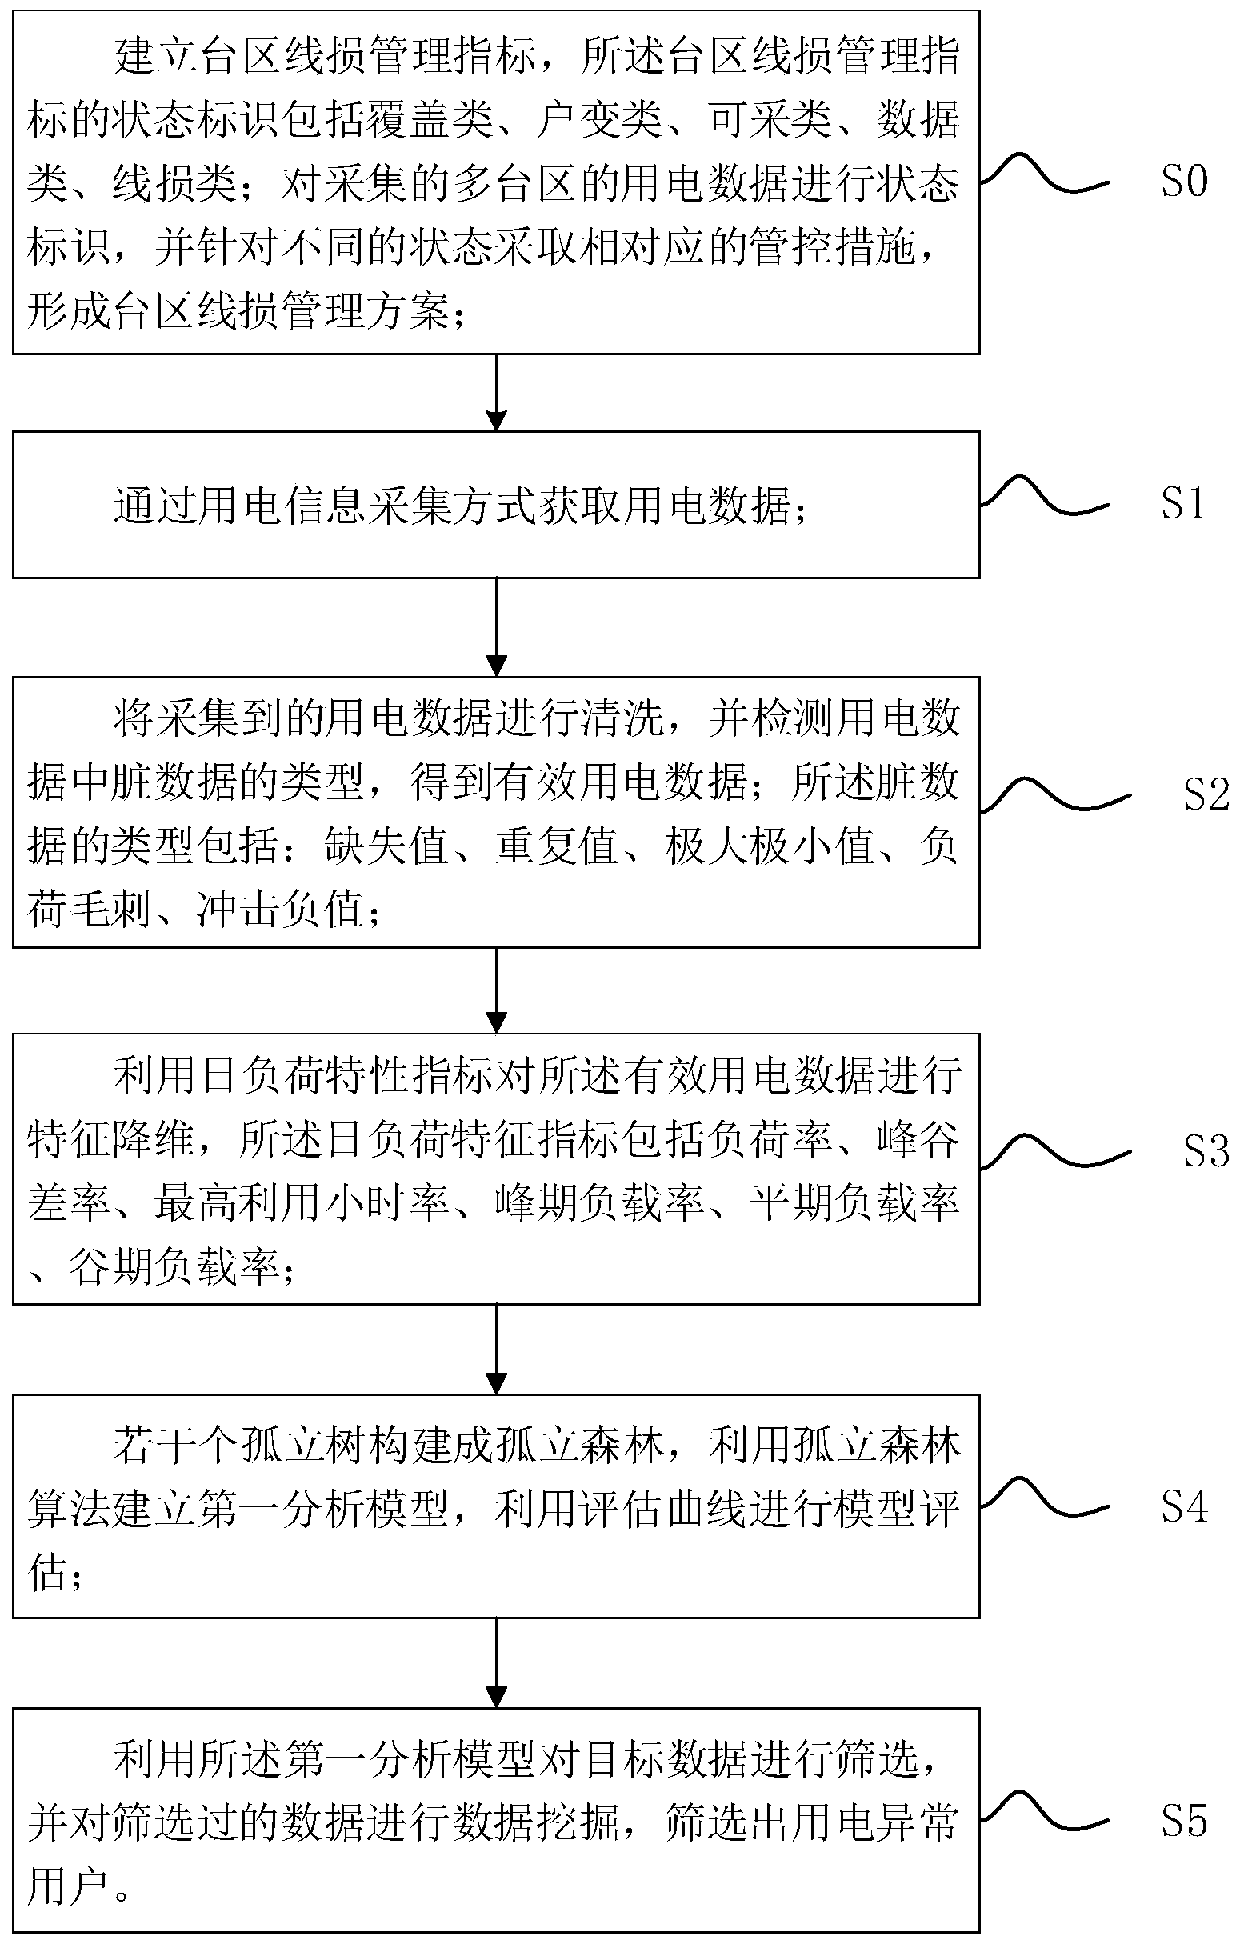 Abnormal power consumption data detection method, system and device, and storage medium